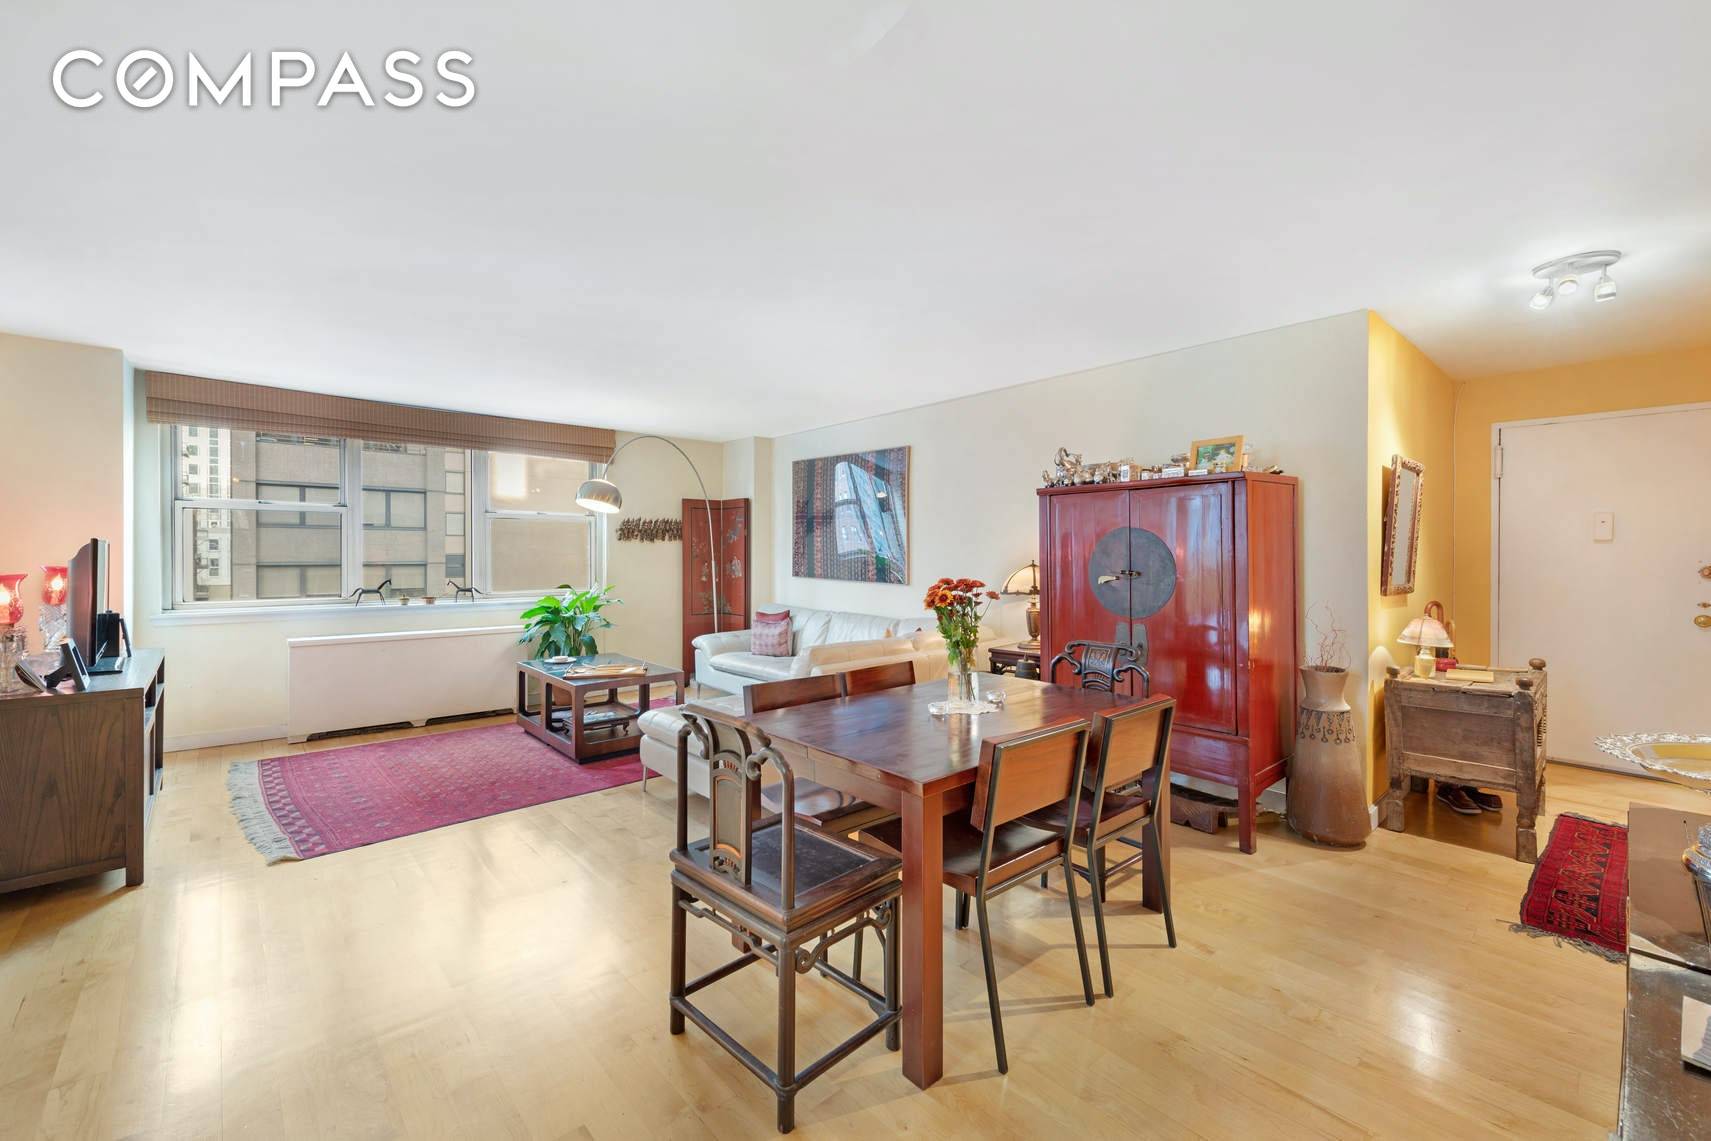 Must see ! Full service Condominium located in the heart of the upper East Side Midtown.